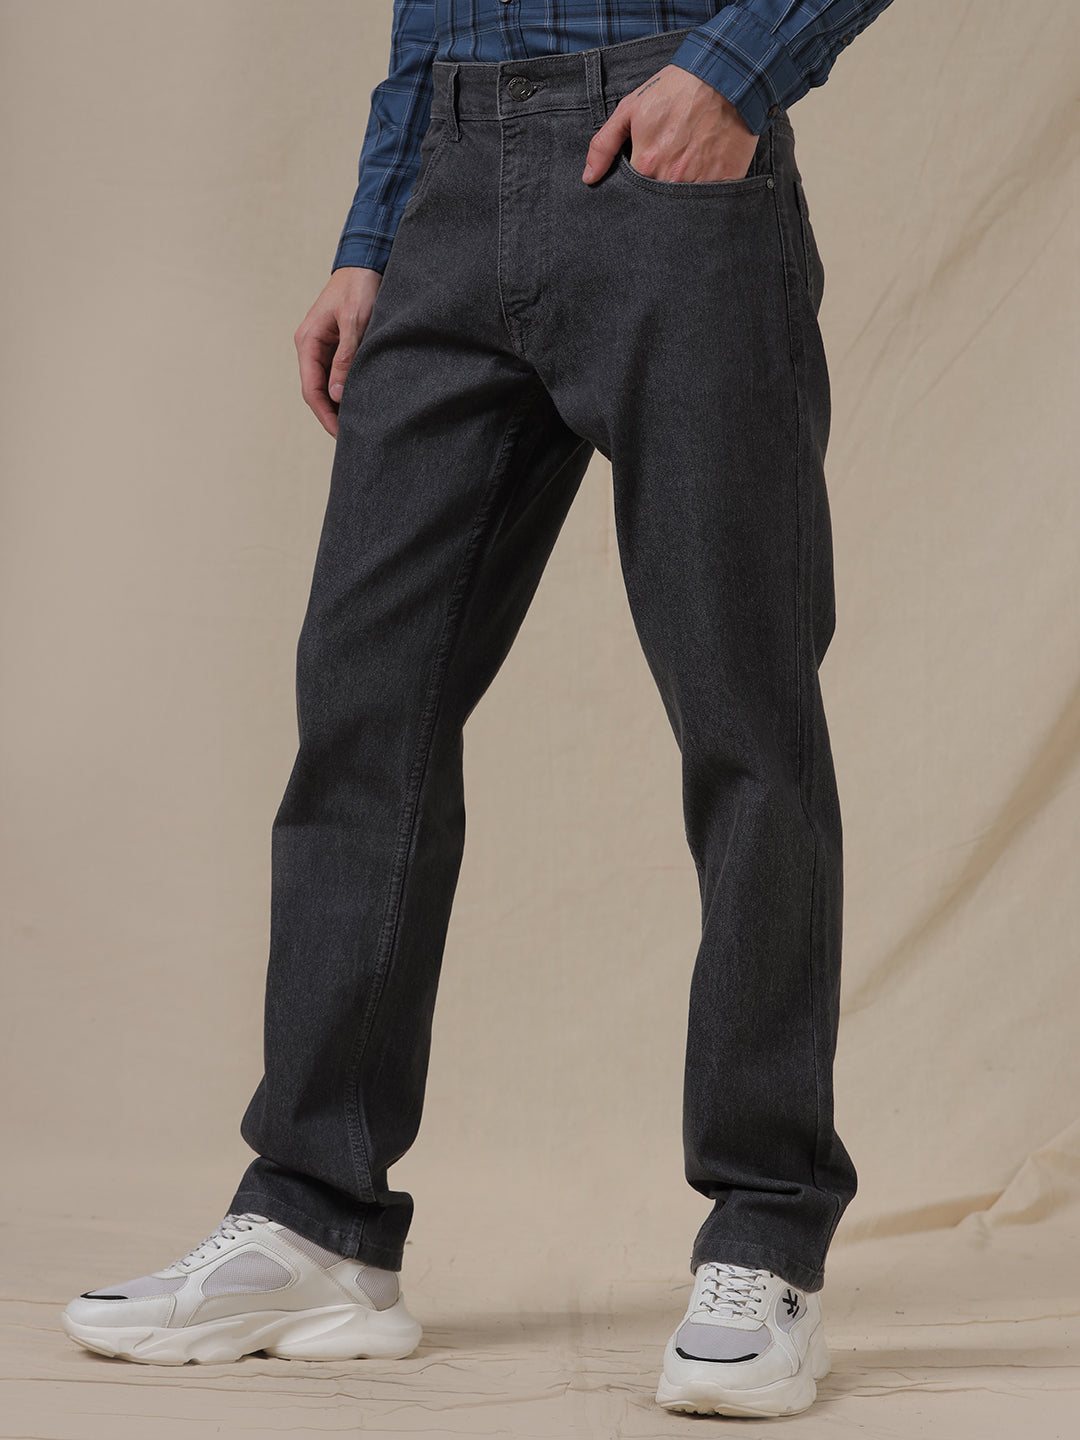 Classic Trend Grey Anti Fit Jeans